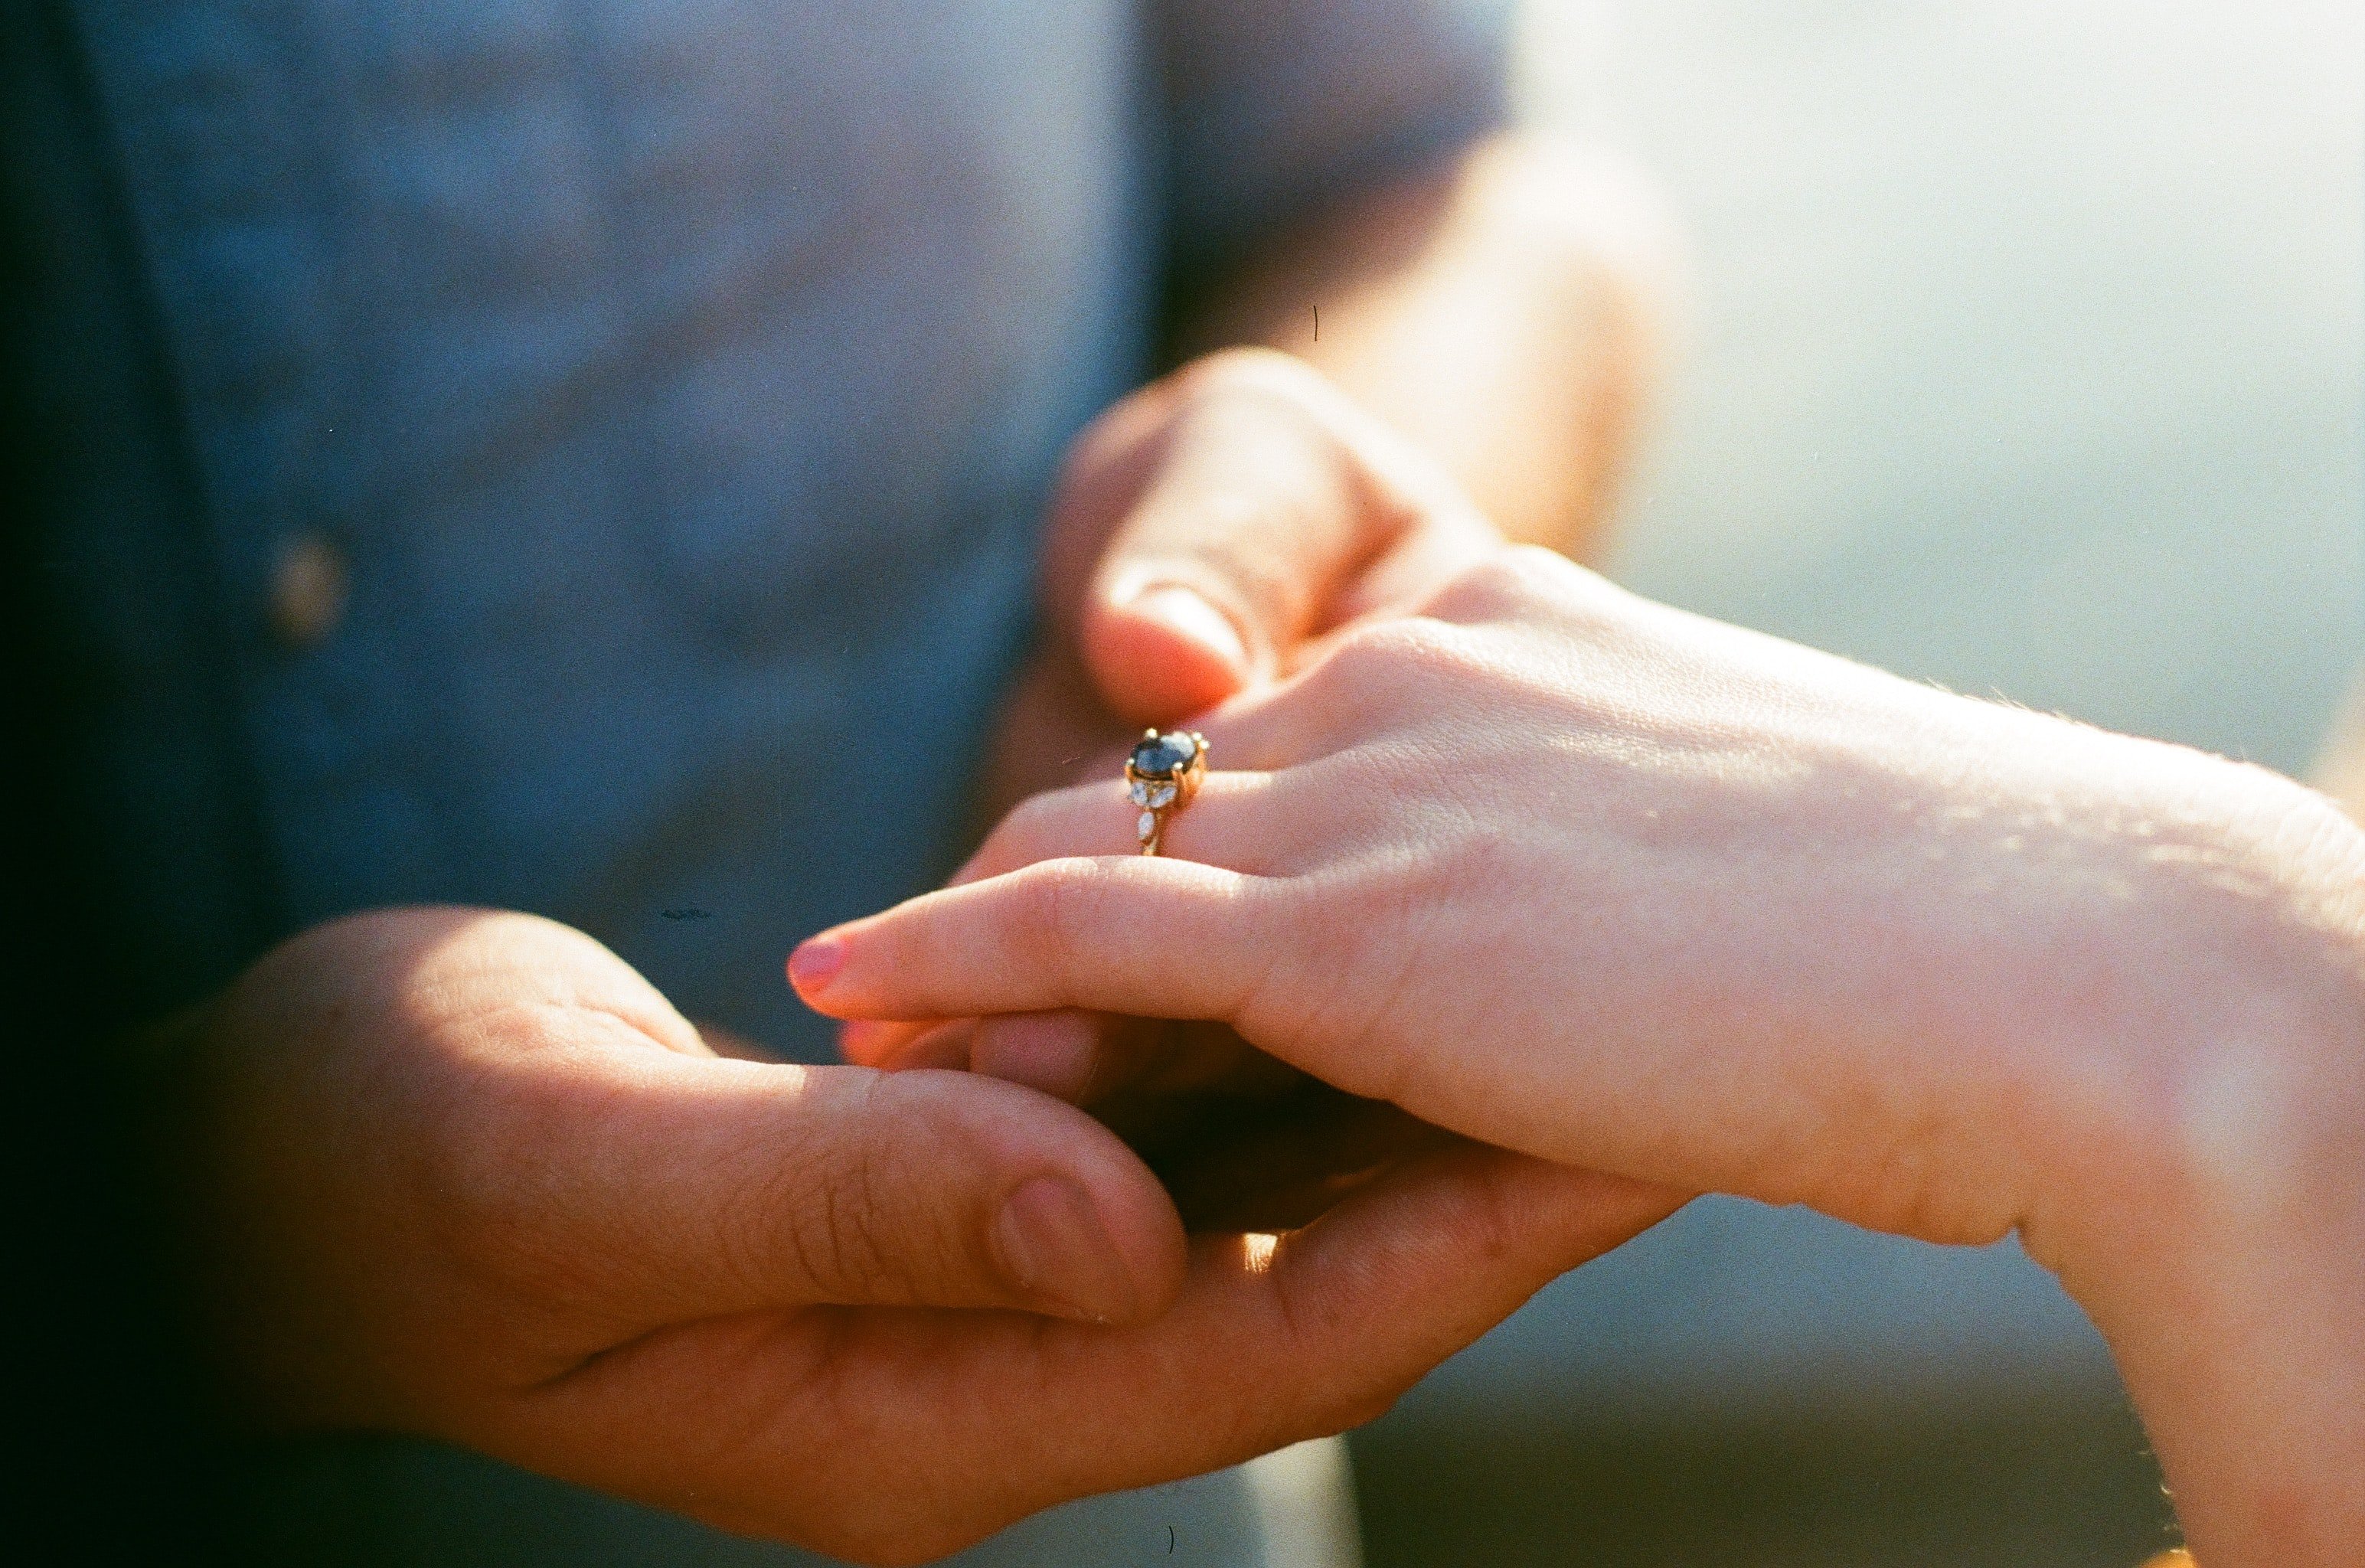 The man's girlfriend wanted to get married, so he proposed to her. | Source: Unsplash